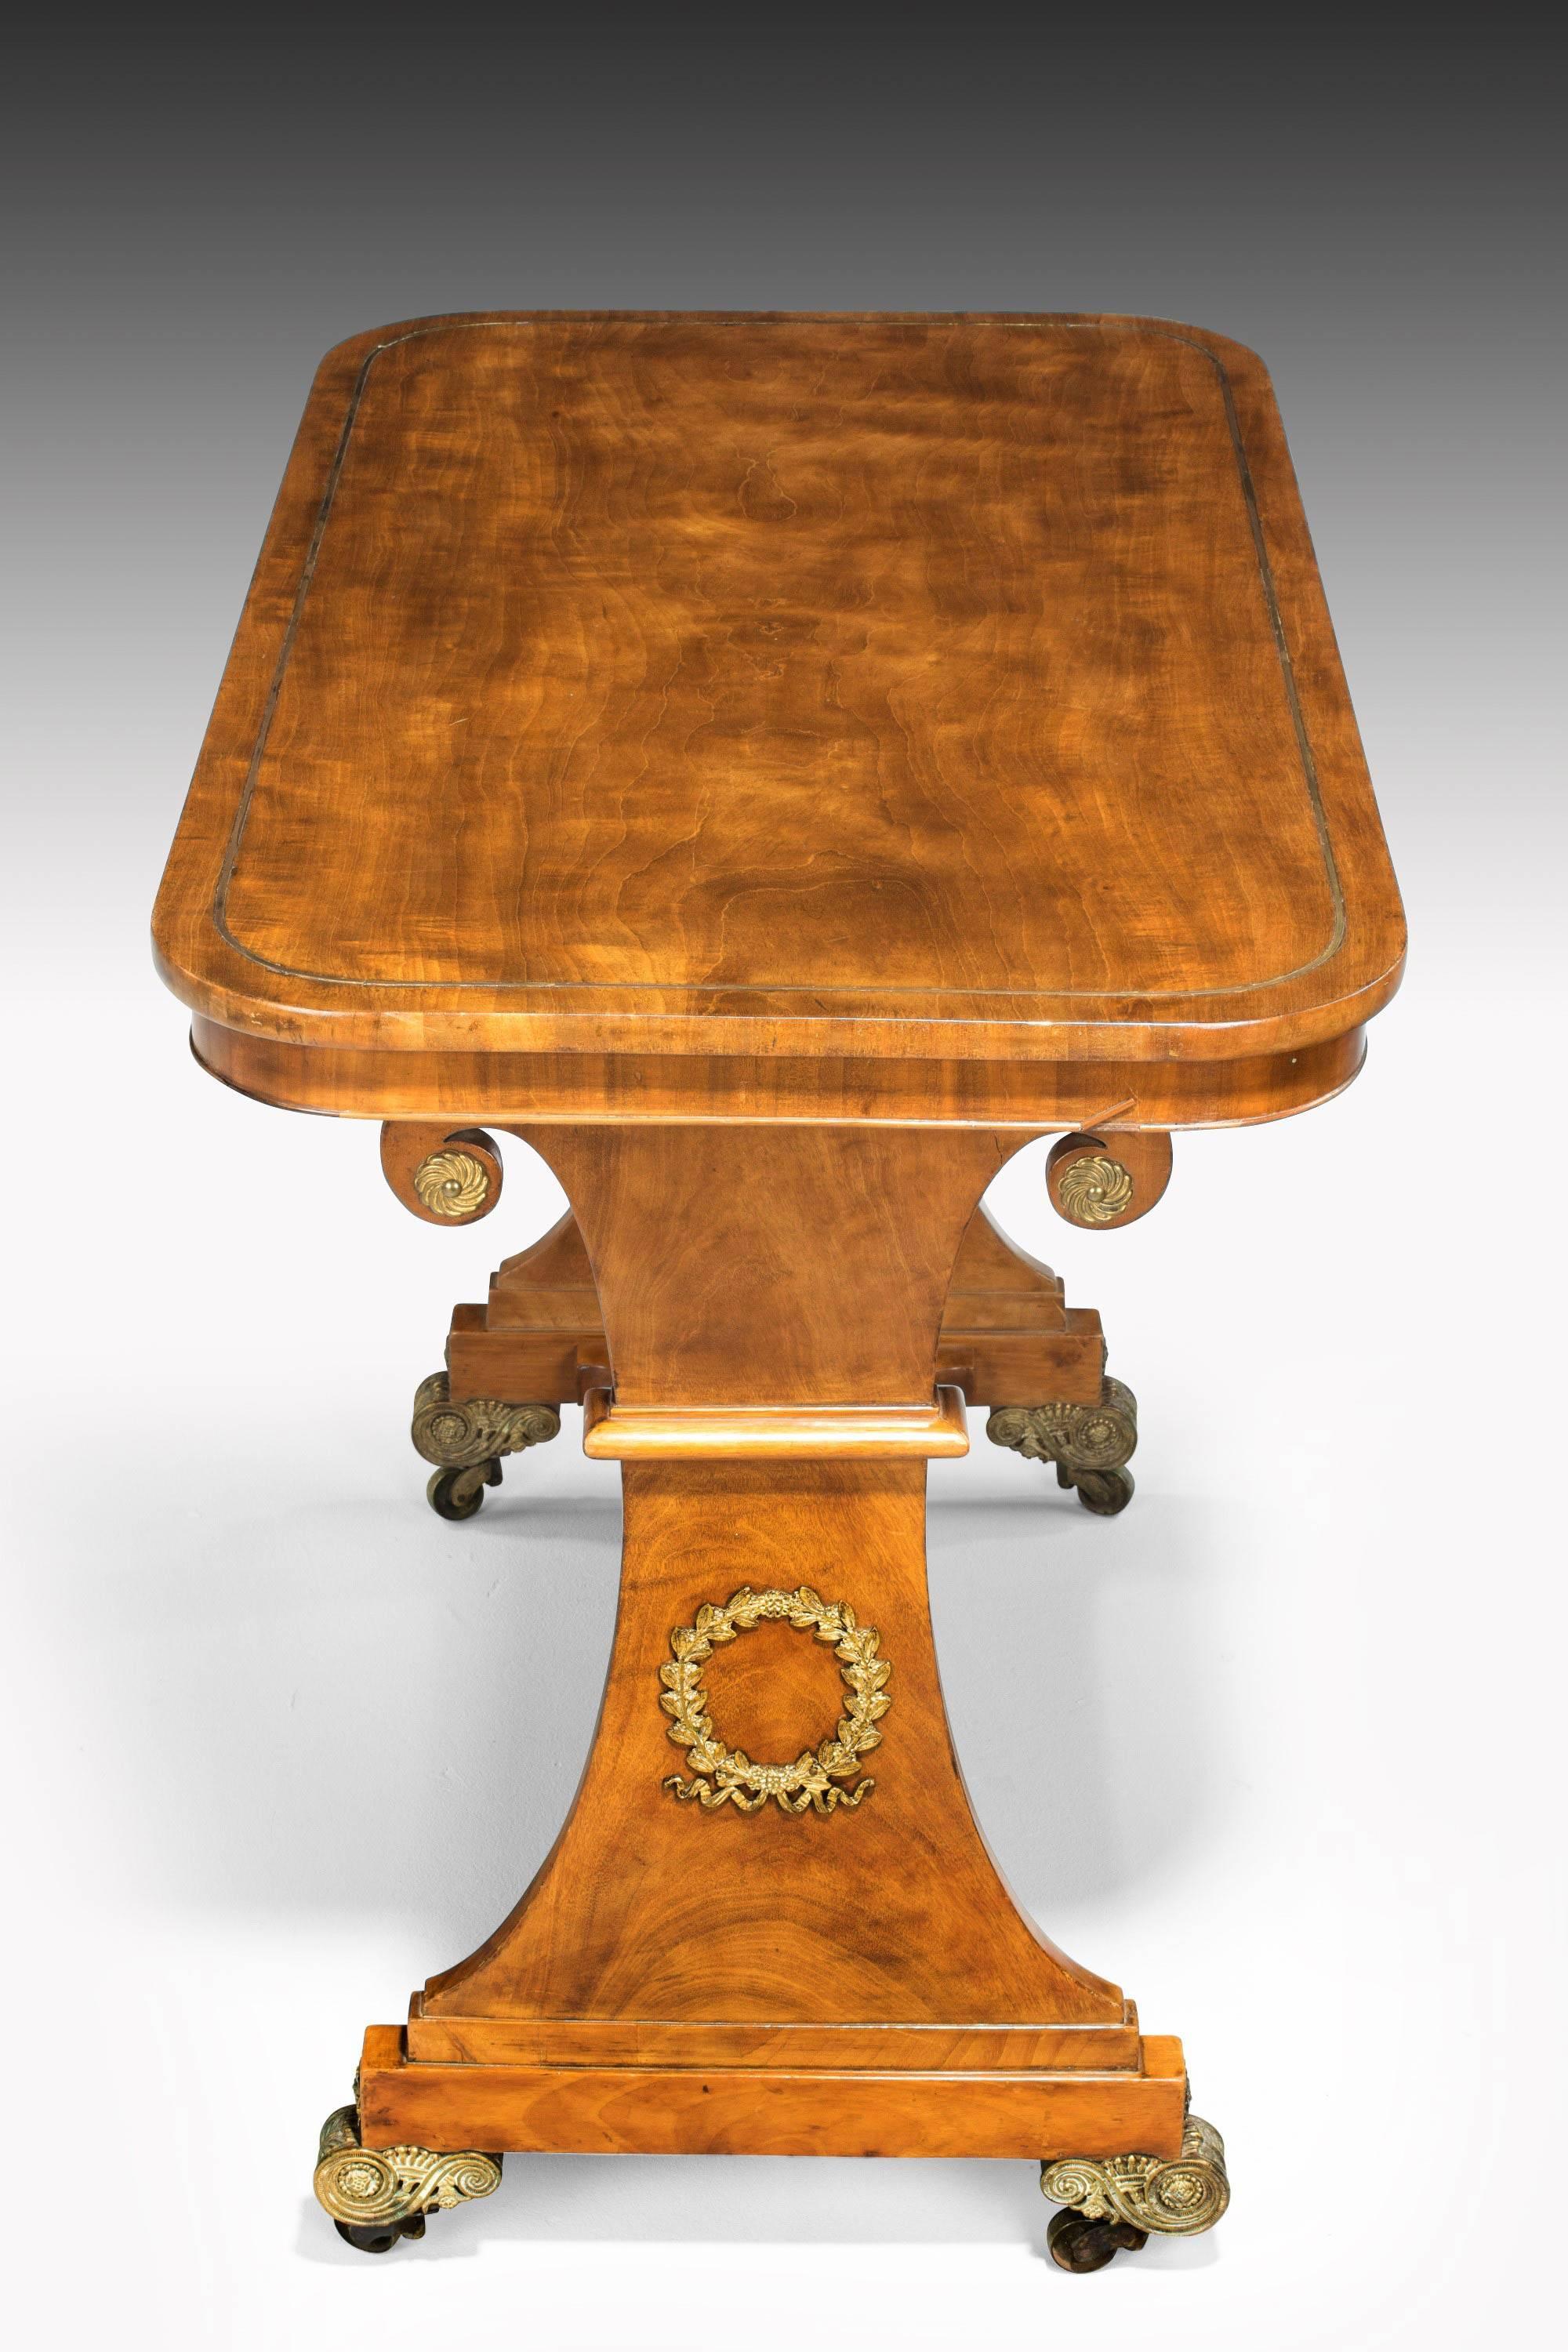 Regency Period Satinwood End Support Table with Figured Ormolu Mounts In Excellent Condition In Peterborough, Northamptonshire